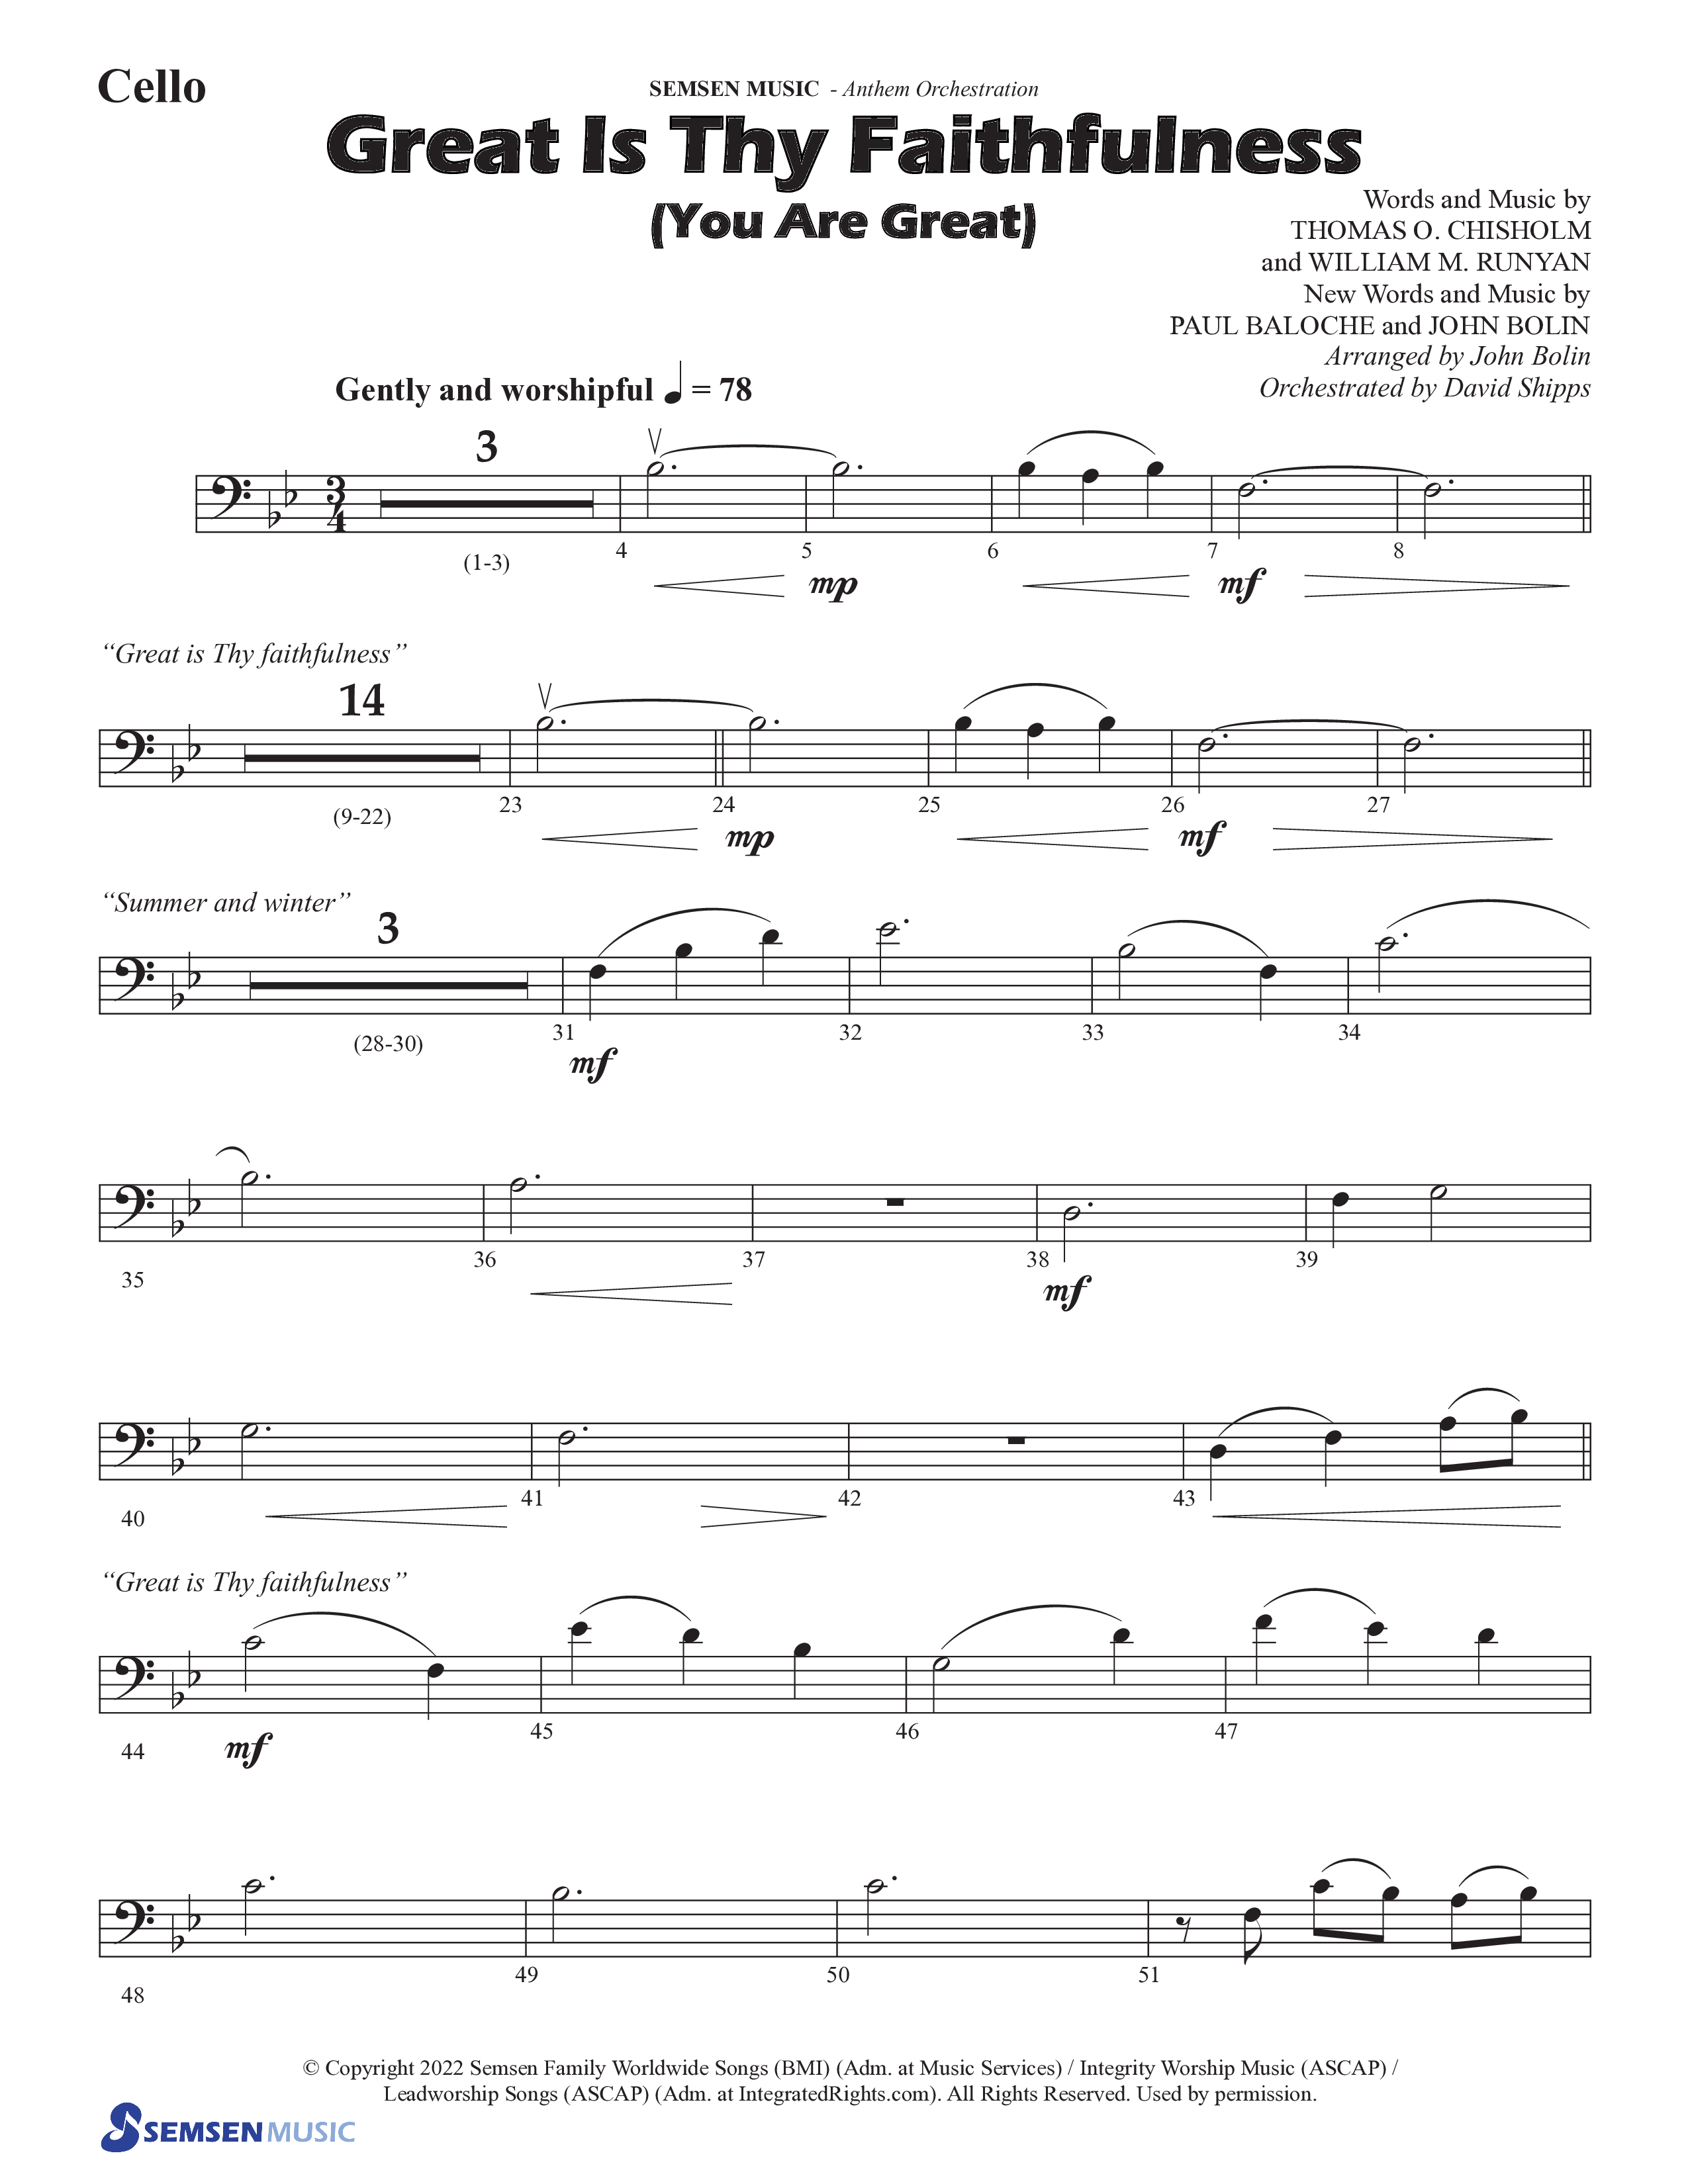 Great Is Thy Faithfulness (You Are Great) (Choral Anthem SATB) Cello (Semsen Music / Arr. John Bolin / Orch. David Shipps)